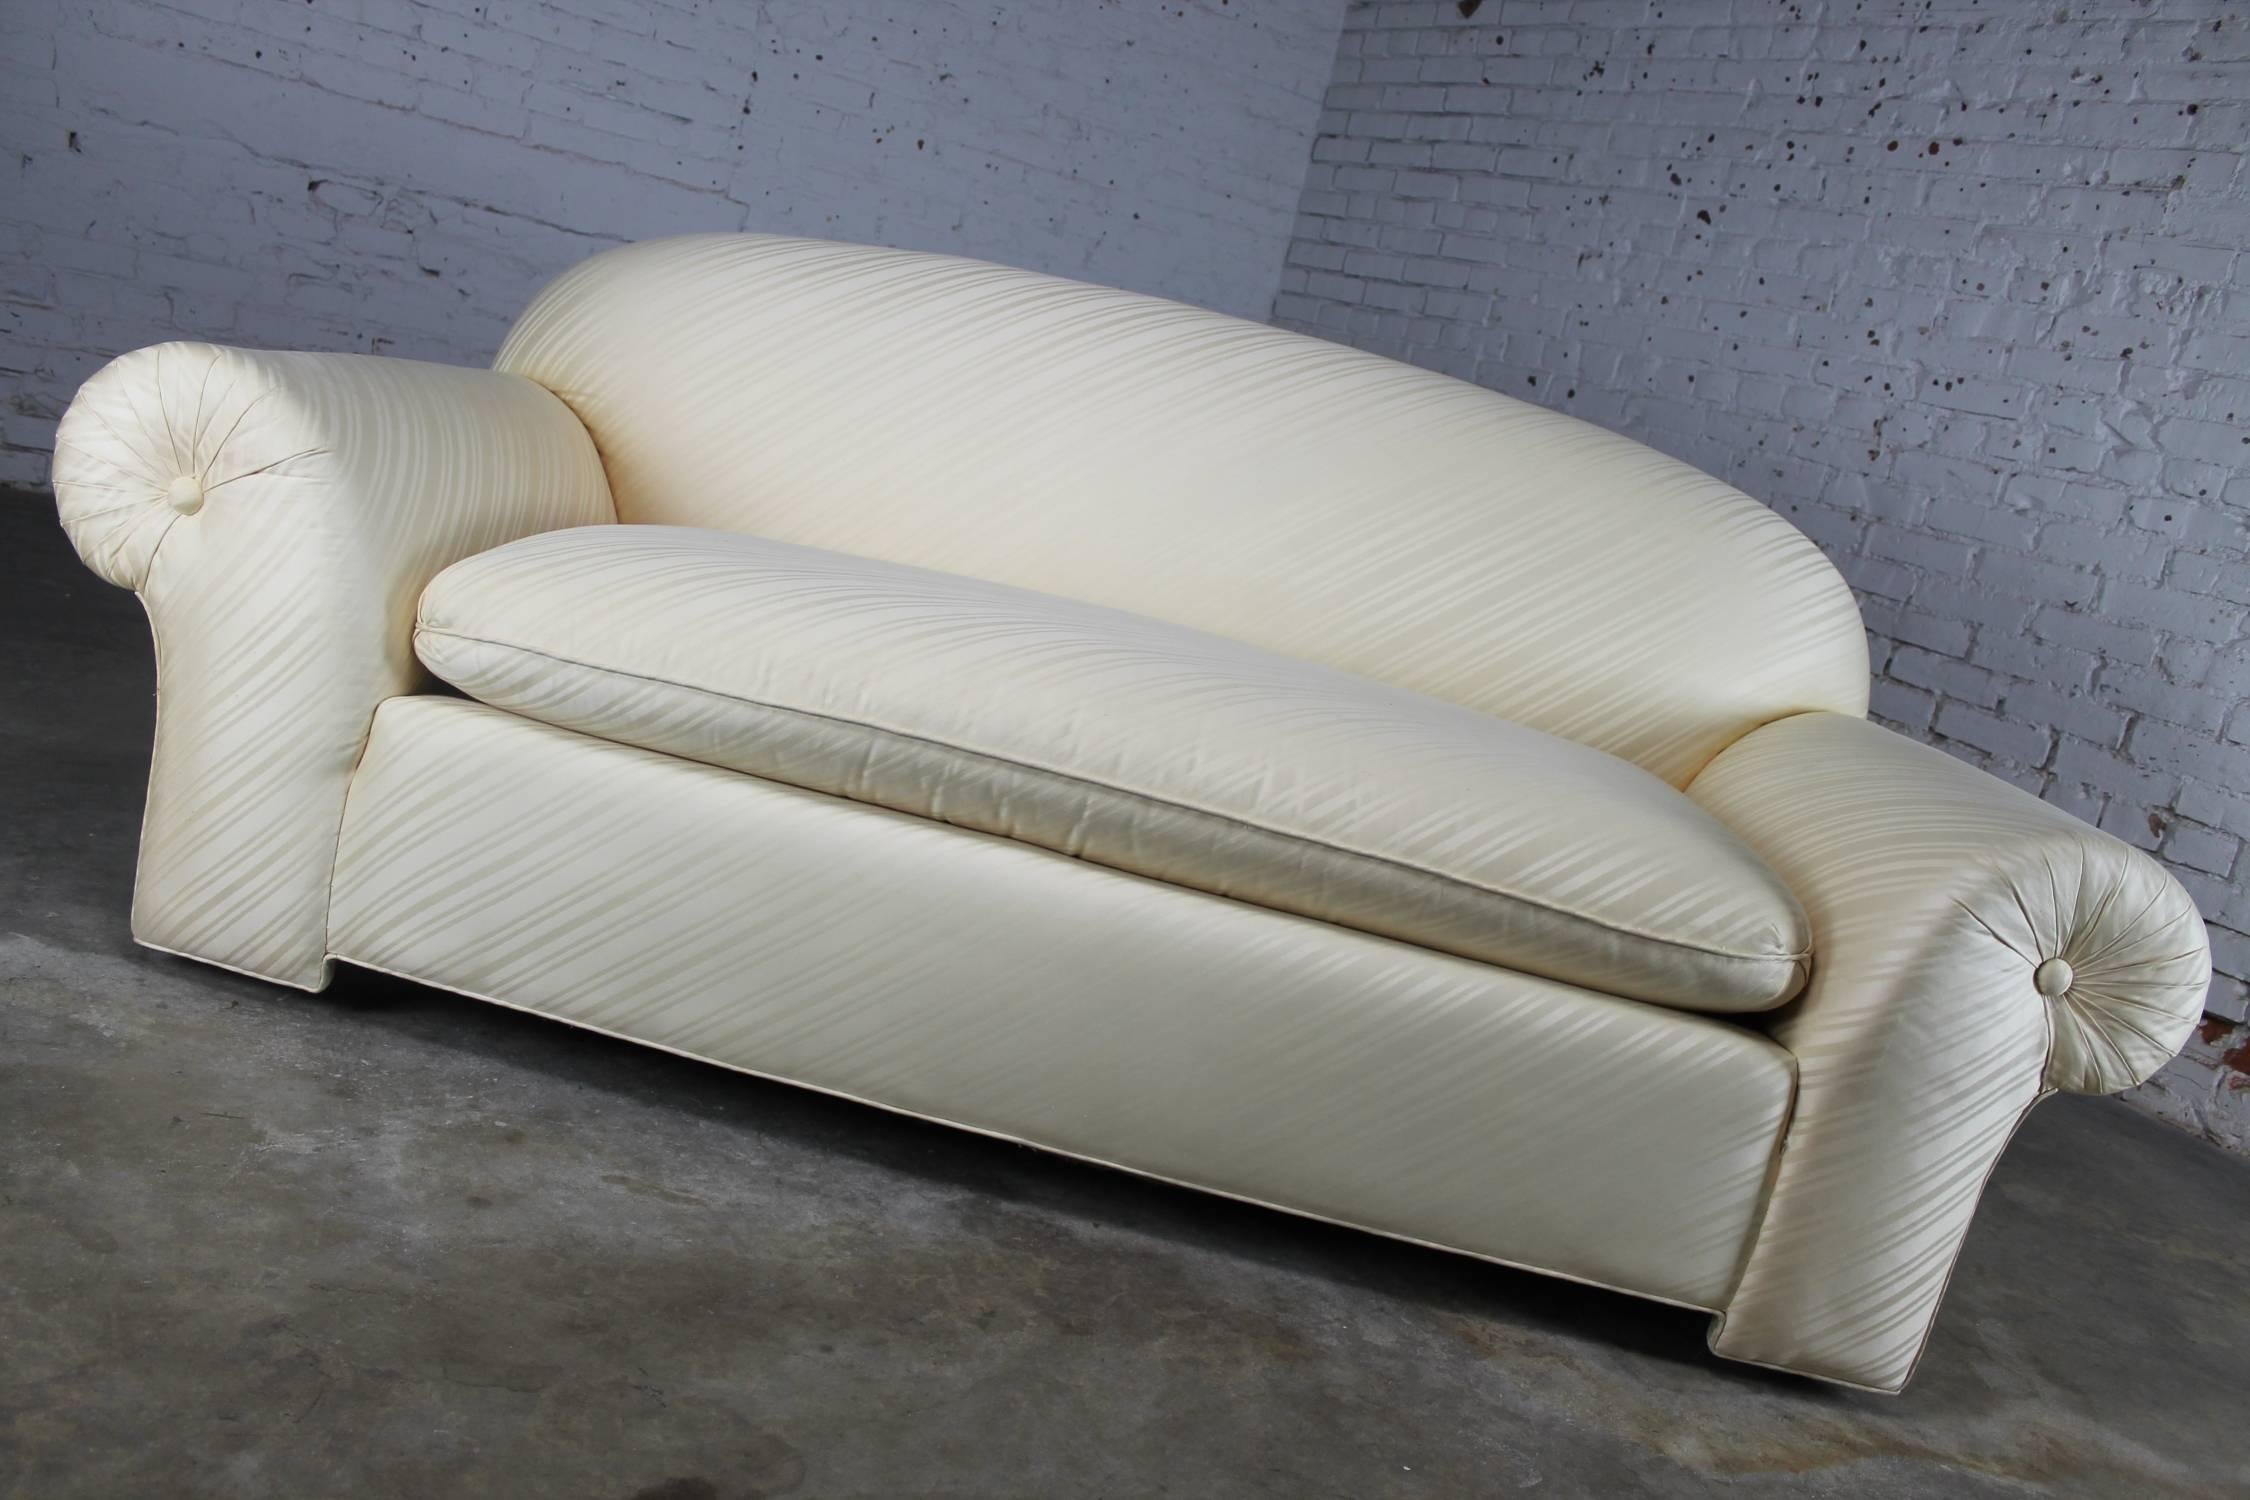 Vintage Donghia sofa circa 1976 in like-new condition. It maintains its original Vice Versa fabric.

This is an awesome vintage Donghia sofa circa 1976. It is in unbelievable mint condition and it is really comfy. It has its original white tone on